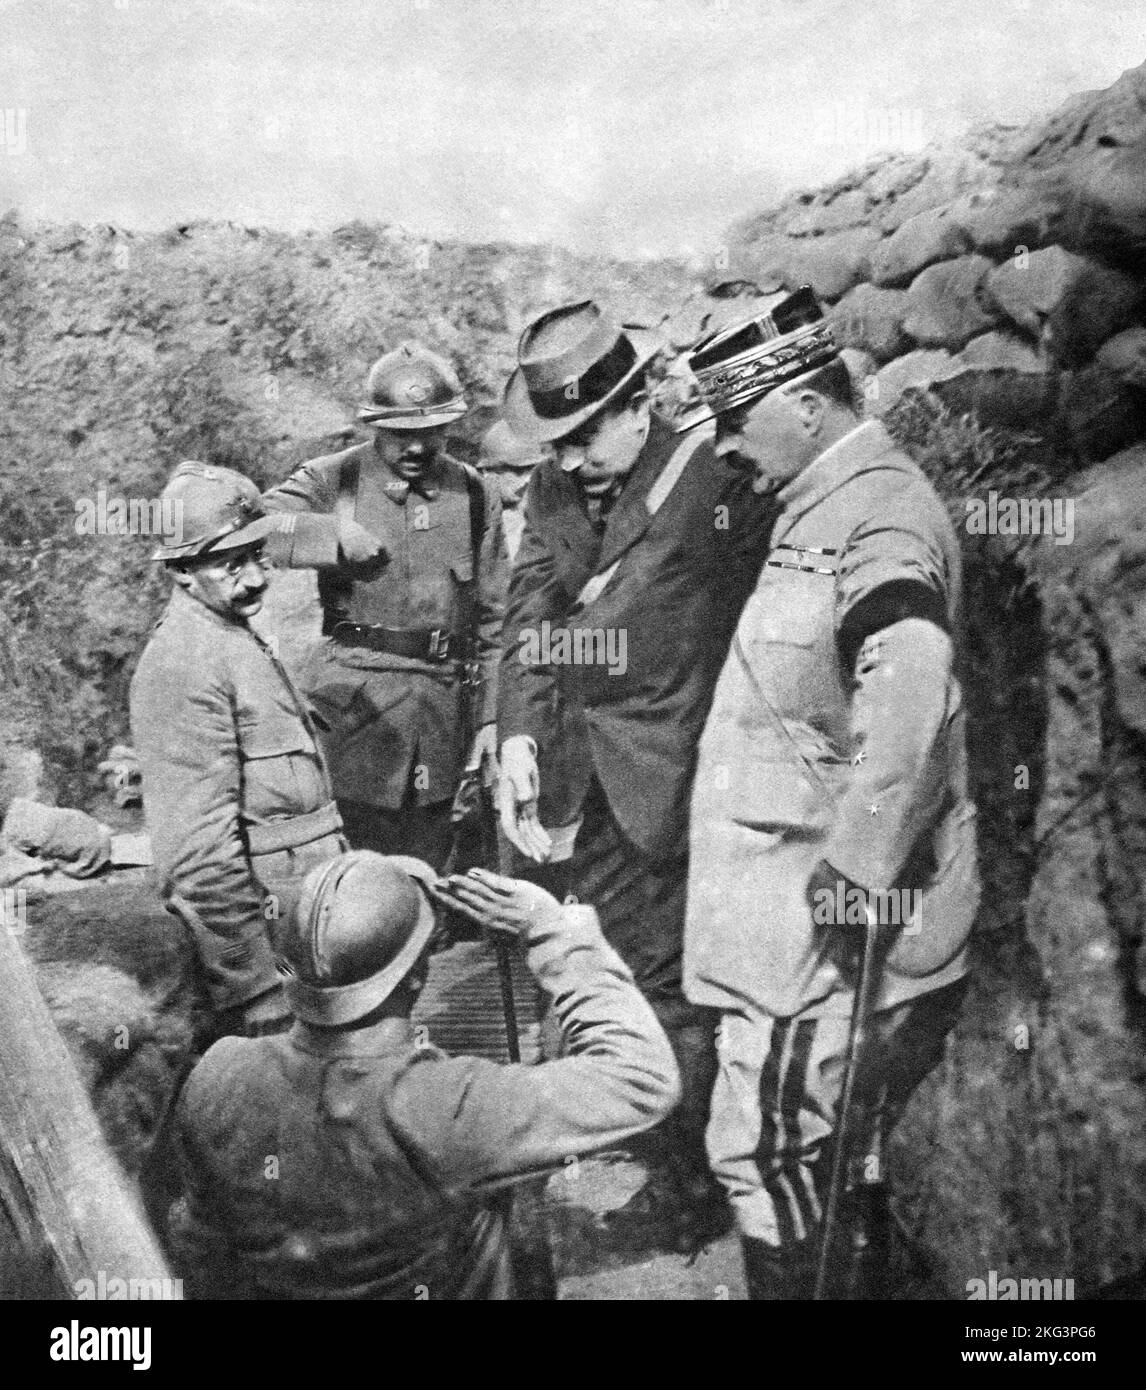 WW1 - 14/18 - Prime Minister Paul PAINLEVE (1863-1933) and General Louis Felix FRANCHET D'ESPEREY (1856-1942) in a trench Stock Photo